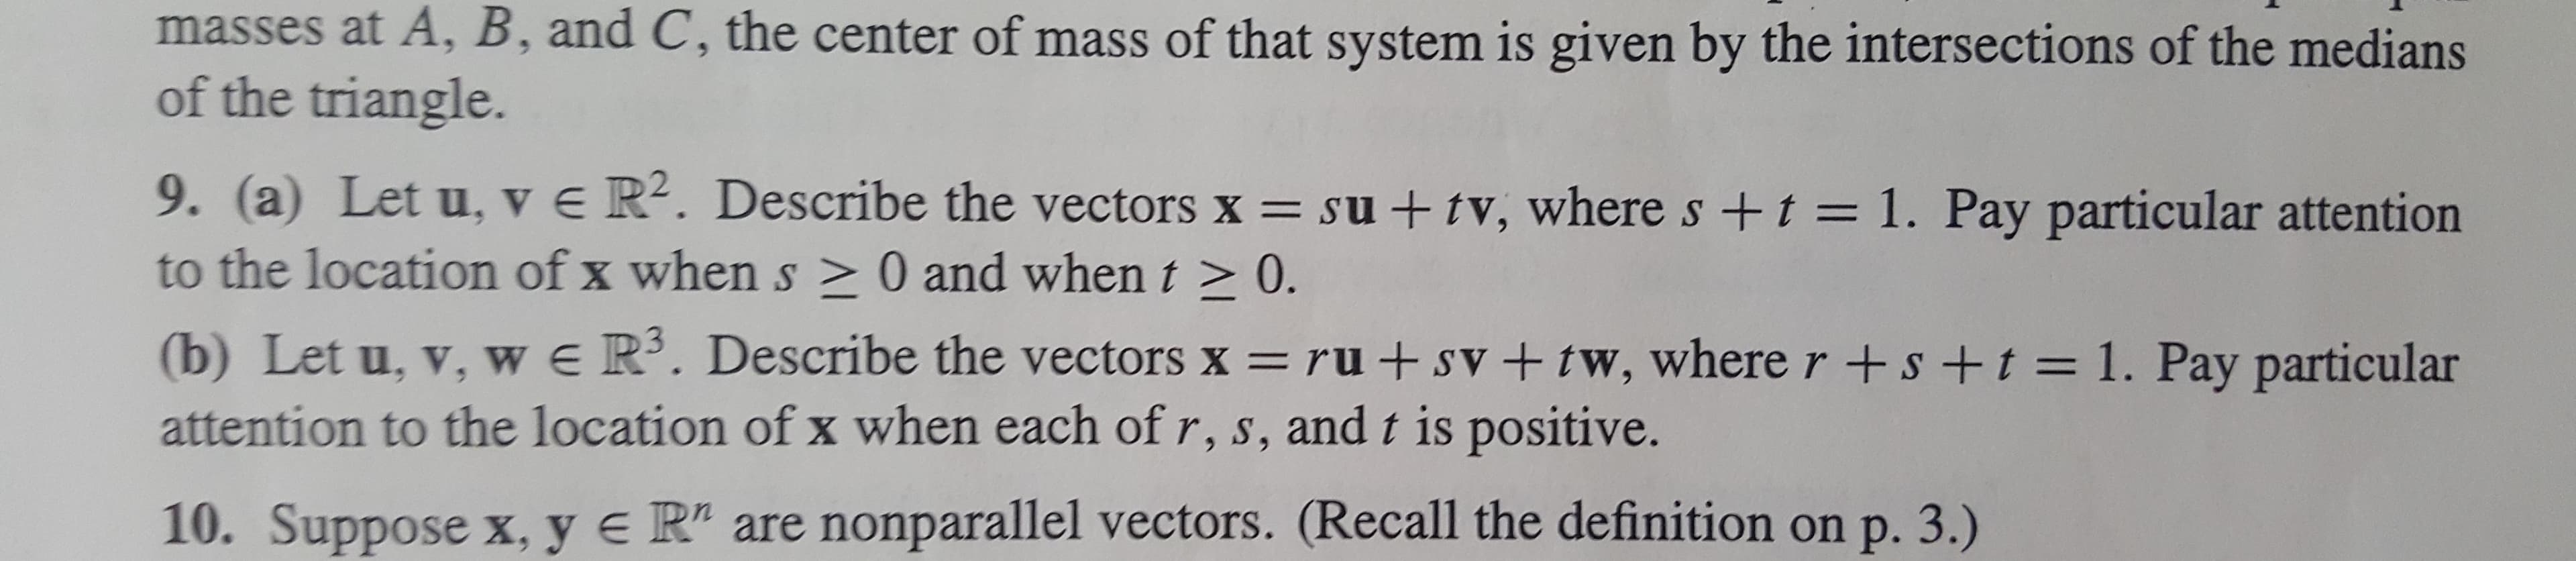 masses at A, B, and C, the center of mass of that system is given by the intersections of the medians
of the triangle.
9. (a) Let u, v e R2. Describe the vectors x su + tv, where s +t = 1. Pay particular attention
to the location of x when s > 0 and whent > 0.
(b) Let u, v, w e Ri. Describe the vectors x ru +sV + tw, wherer+s +t = 1. Pay particular
attention to the location of x when each of r, s, and t is positive.
10. Suppose x, y e R" are nonparallel vectors. (Recall the definition on p. 3.)
